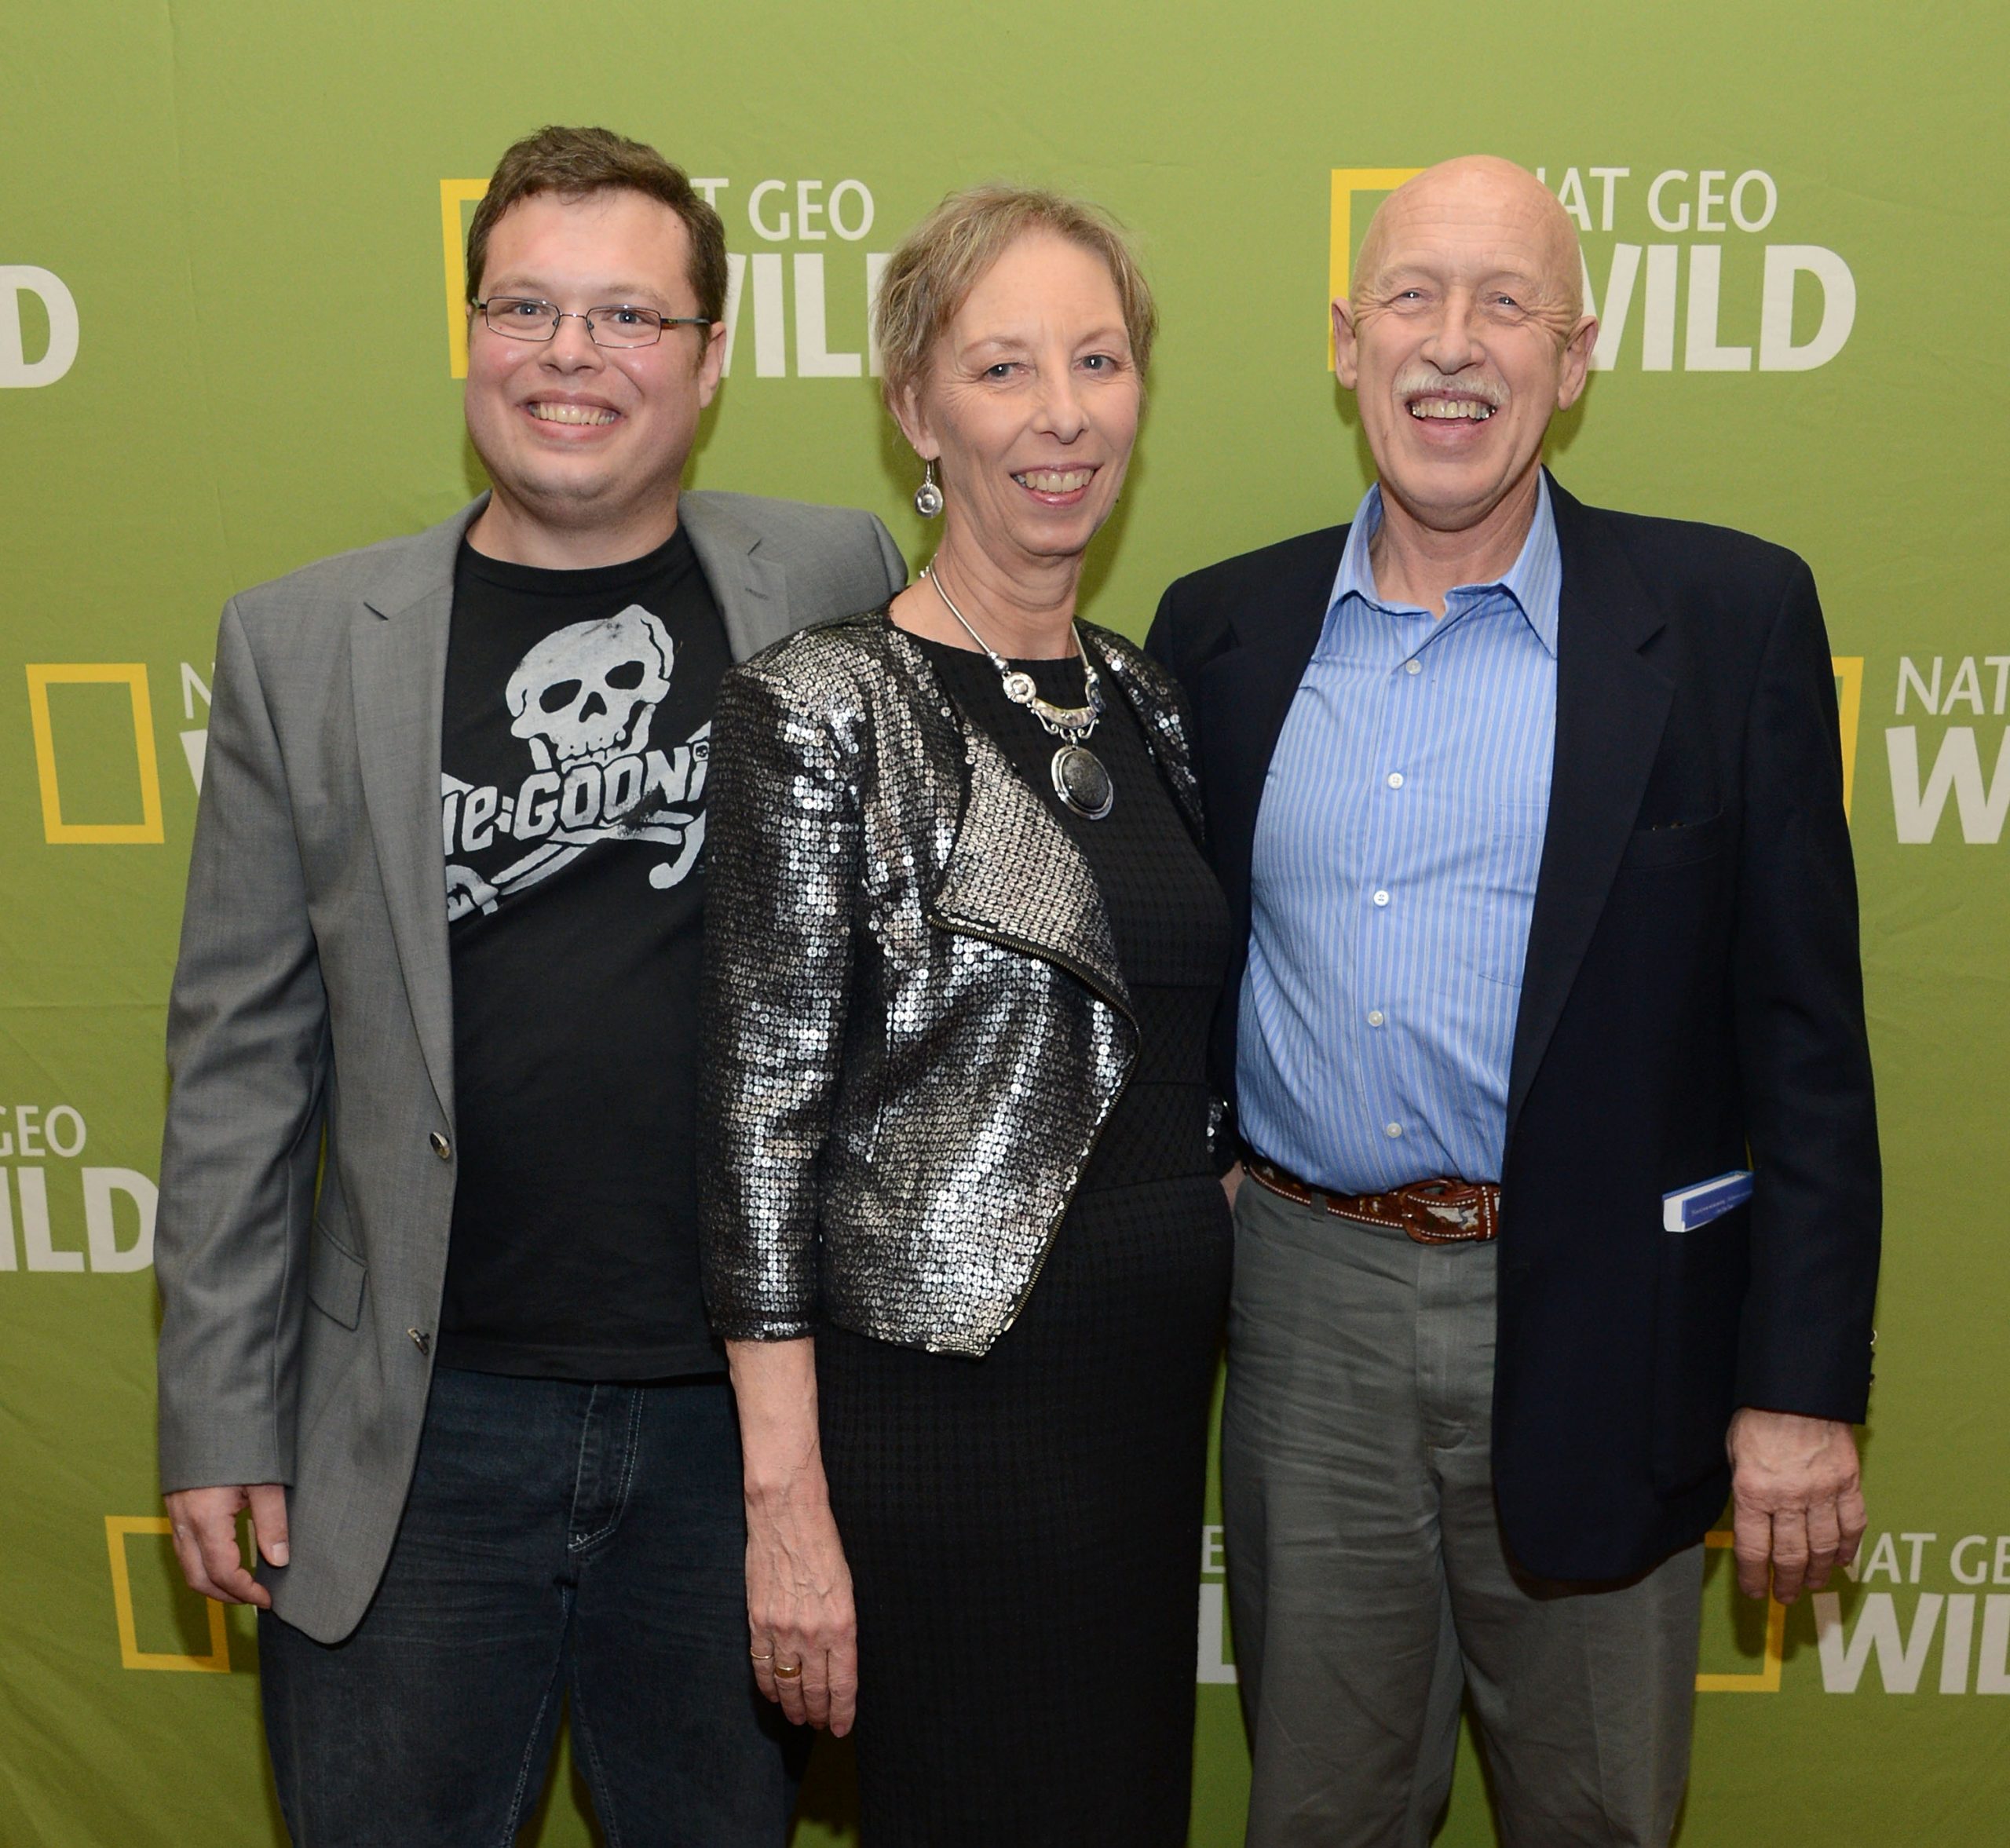 Left to right, Charles Pol, Diane Pol, and Dr. Jan Pol of 'The Incredible Dr. Pol'